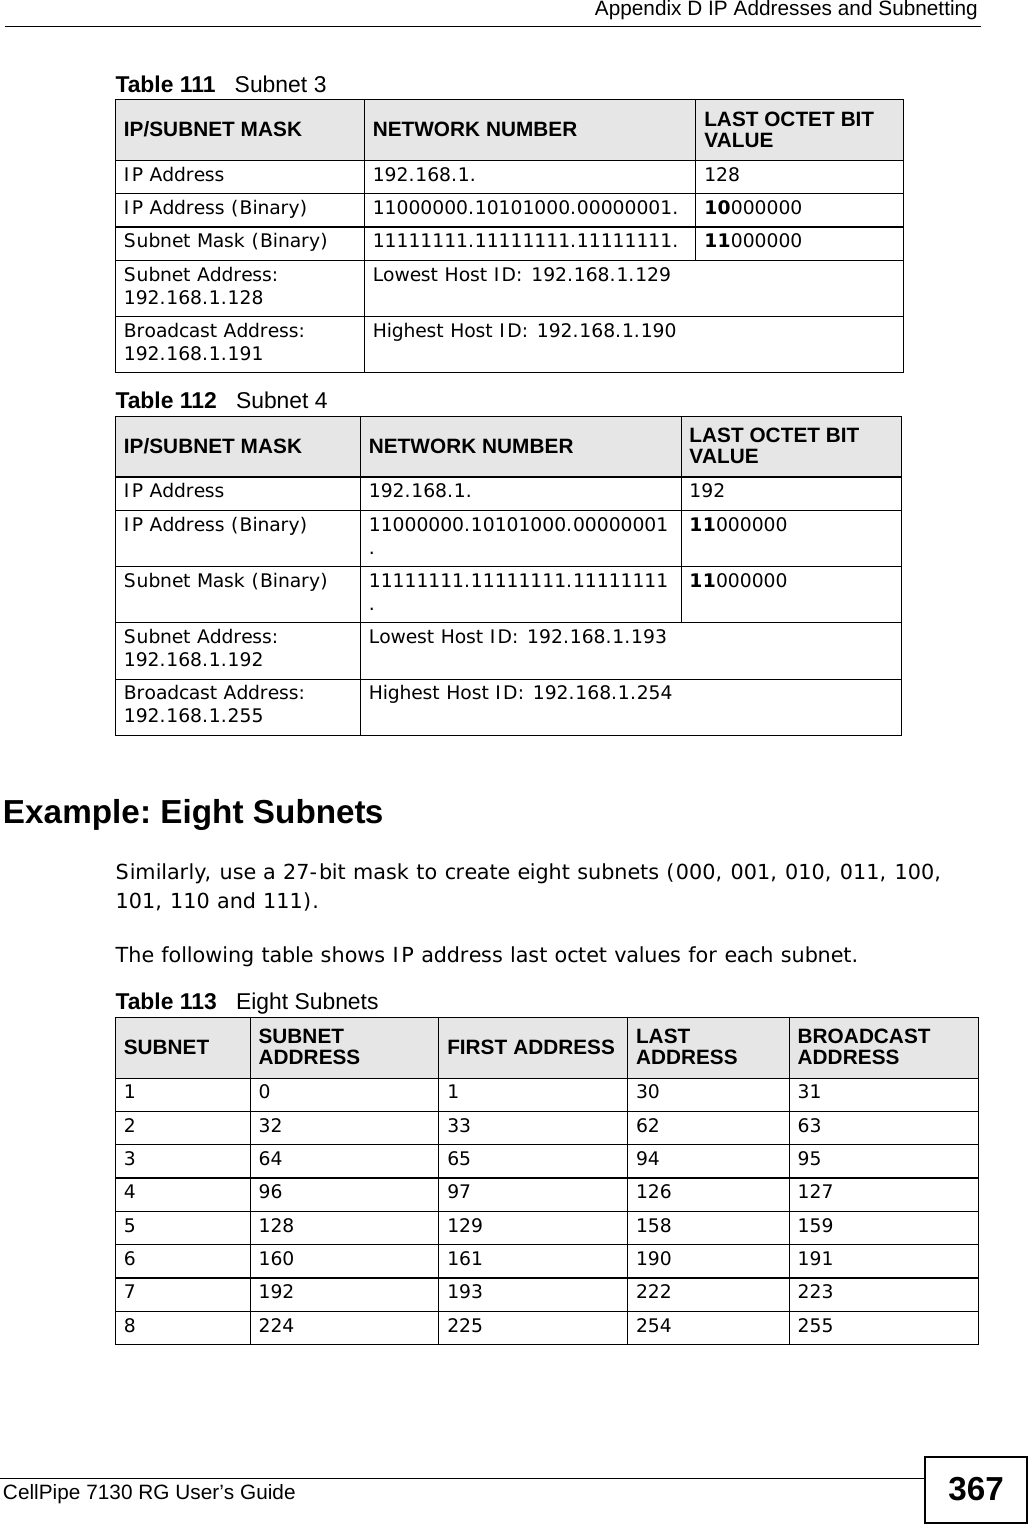  Appendix D IP Addresses and SubnettingCellPipe 7130 RG User’s Guide 367Example: Eight SubnetsSimilarly, use a 27-bit mask to create eight subnets (000, 001, 010, 011, 100, 101, 110 and 111). The following table shows IP address last octet values for each subnet.Table 111   Subnet 3IP/SUBNET MASK NETWORK NUMBER LAST OCTET BIT VALUEIP Address 192.168.1. 128IP Address (Binary) 11000000.10101000.00000001. 10000000Subnet Mask (Binary) 11111111.11111111.11111111. 11000000Subnet Address: 192.168.1.128 Lowest Host ID: 192.168.1.129Broadcast Address: 192.168.1.191 Highest Host ID: 192.168.1.190Table 112   Subnet 4IP/SUBNET MASK NETWORK NUMBER LAST OCTET BIT VALUEIP Address 192.168.1. 192IP Address (Binary) 11000000.10101000.00000001. 11000000Subnet Mask (Binary) 11111111.11111111.11111111. 11000000Subnet Address: 192.168.1.192 Lowest Host ID: 192.168.1.193Broadcast Address: 192.168.1.255 Highest Host ID: 192.168.1.254Table 113   Eight SubnetsSUBNET SUBNET ADDRESS FIRST ADDRESS LAST ADDRESS BROADCAST ADDRESS1 0 1 30 31232 33 62 63364 65 94 95496 97 126 1275128 129 158 1596160 161 190 1917192 193 222 2238224 225 254 255